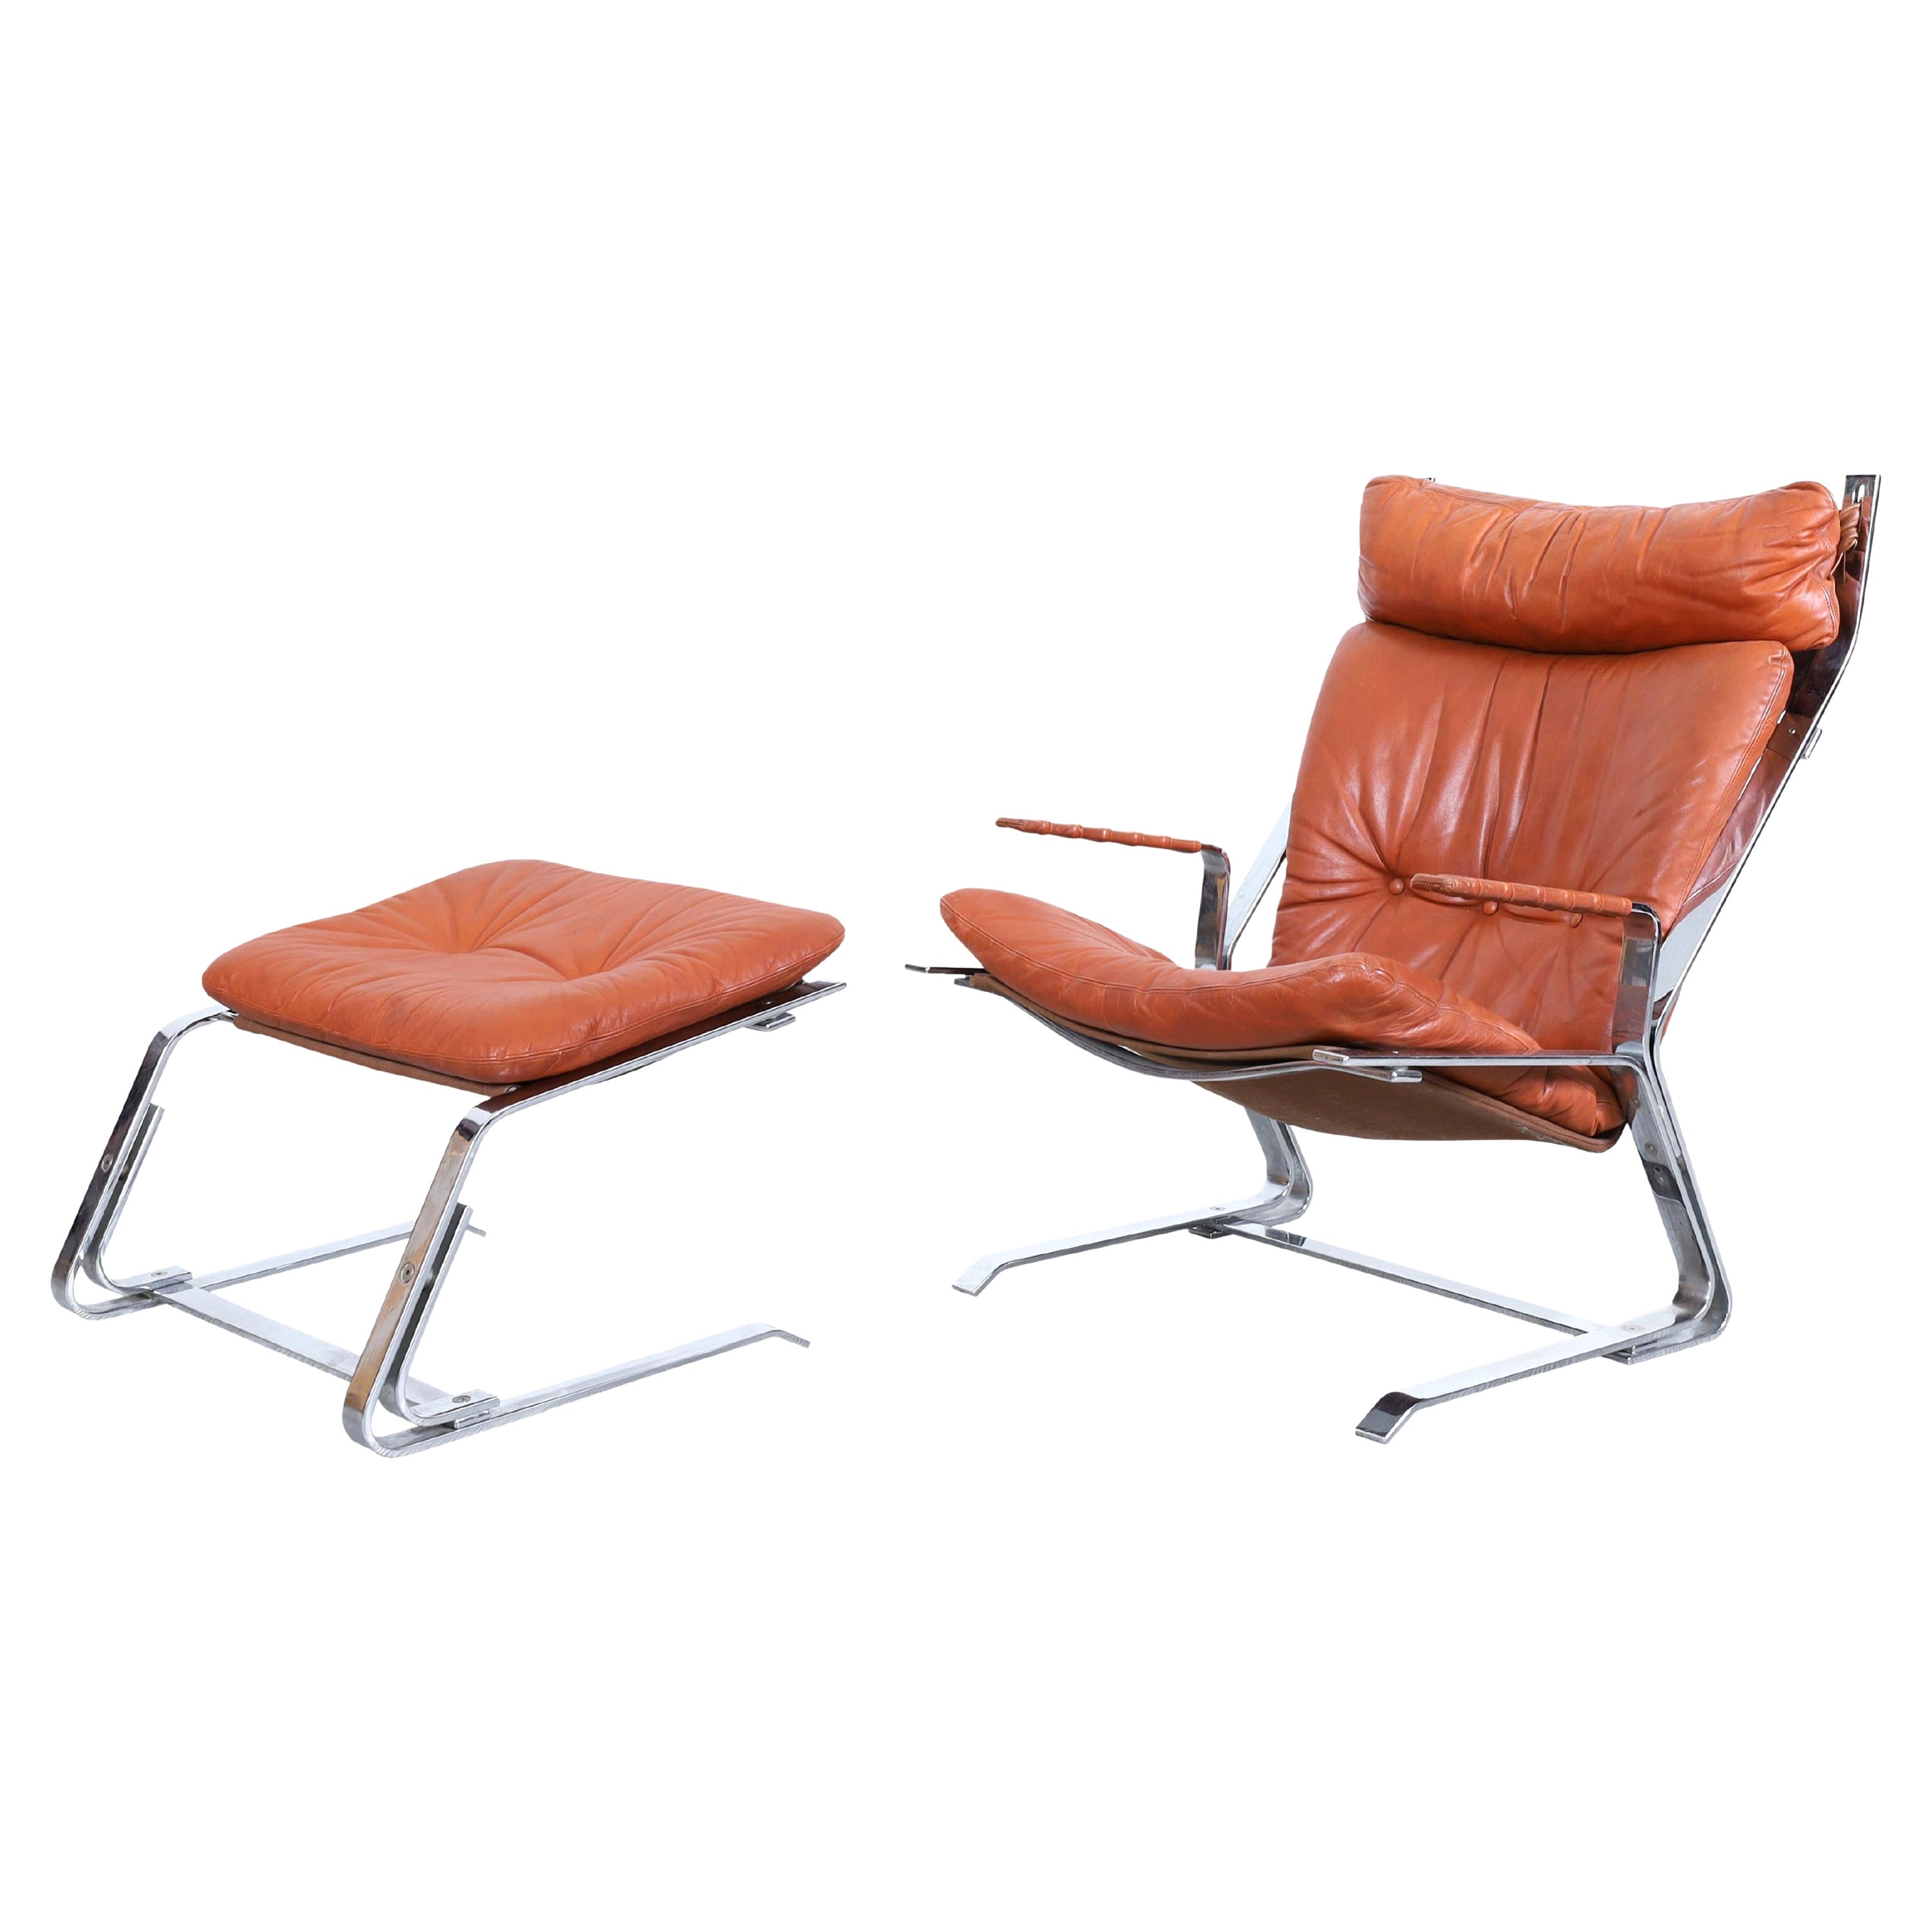 Midcentury Leather Lounge Chair and Ottoman by Elsa and Nordahl Solheim